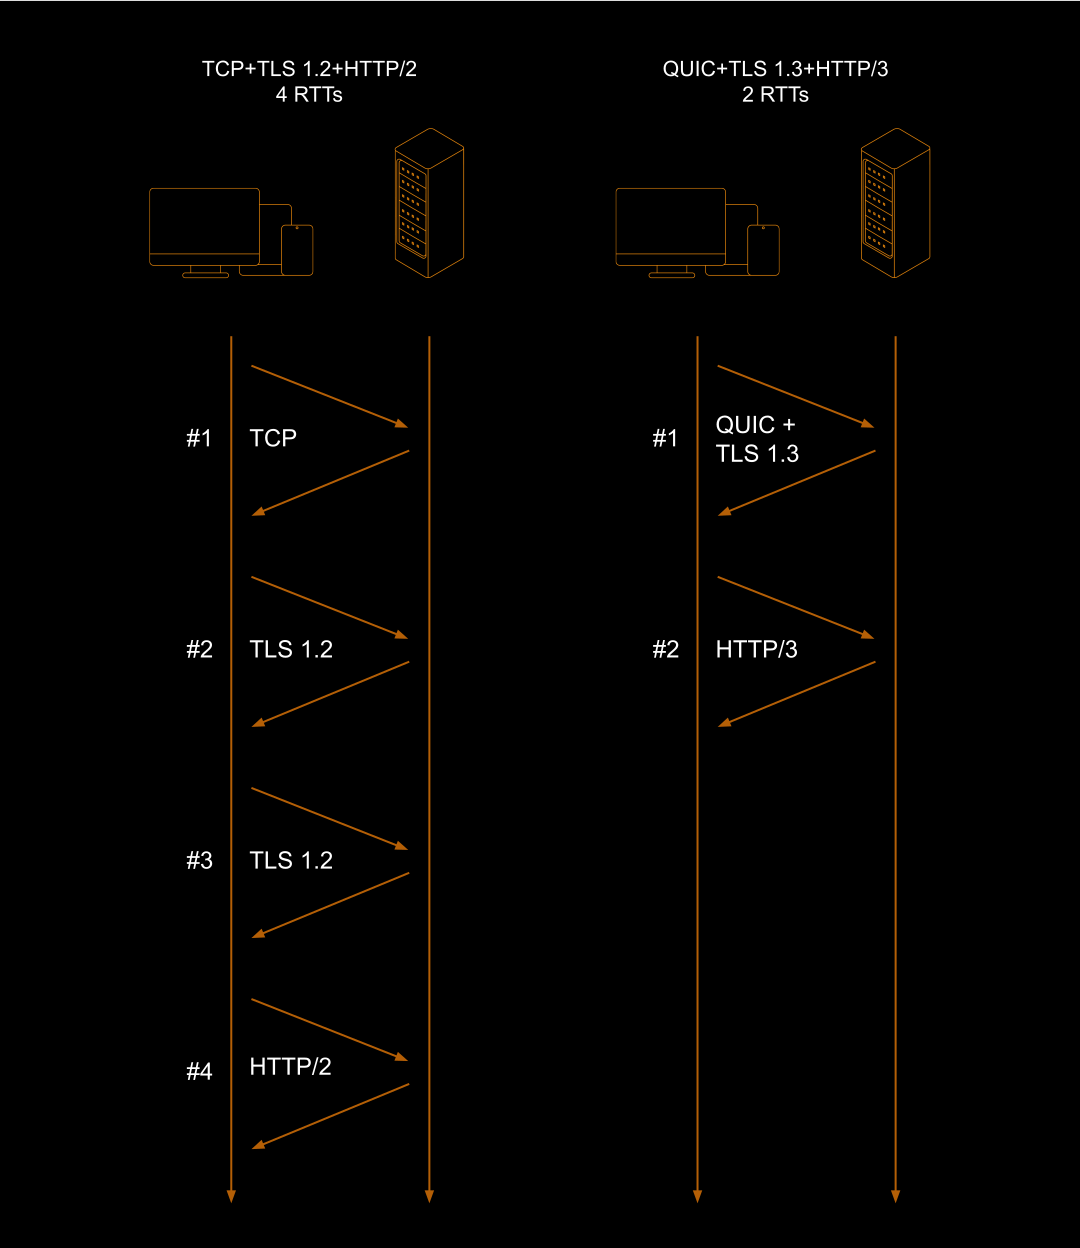 Diagram comparing the establishment of a secure connection in HTTP/2 and HTTP/3. While four RTTs are necessary in HTTP/2, only two are sufficient in HTTP/3.